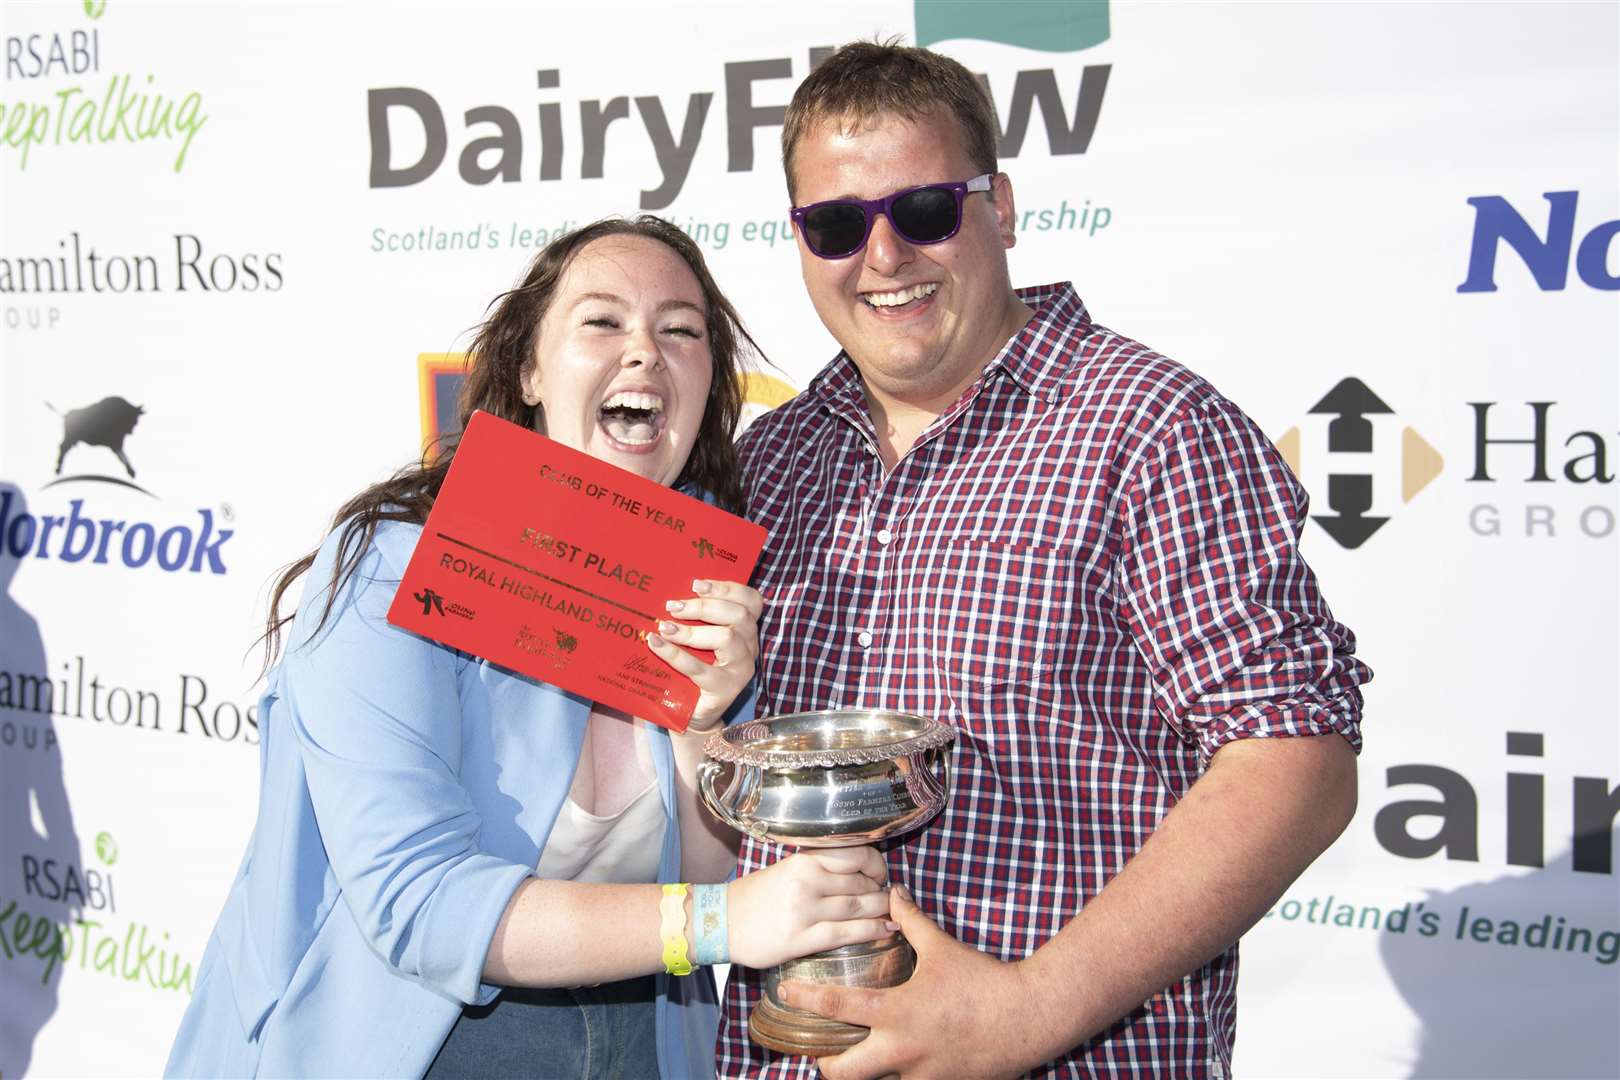 Beth Douglas, secretary, and William Campbell, chairman, collect the National Club of the Year trophy at the Royal Highland Show on behalf of Bower Young Farmers.